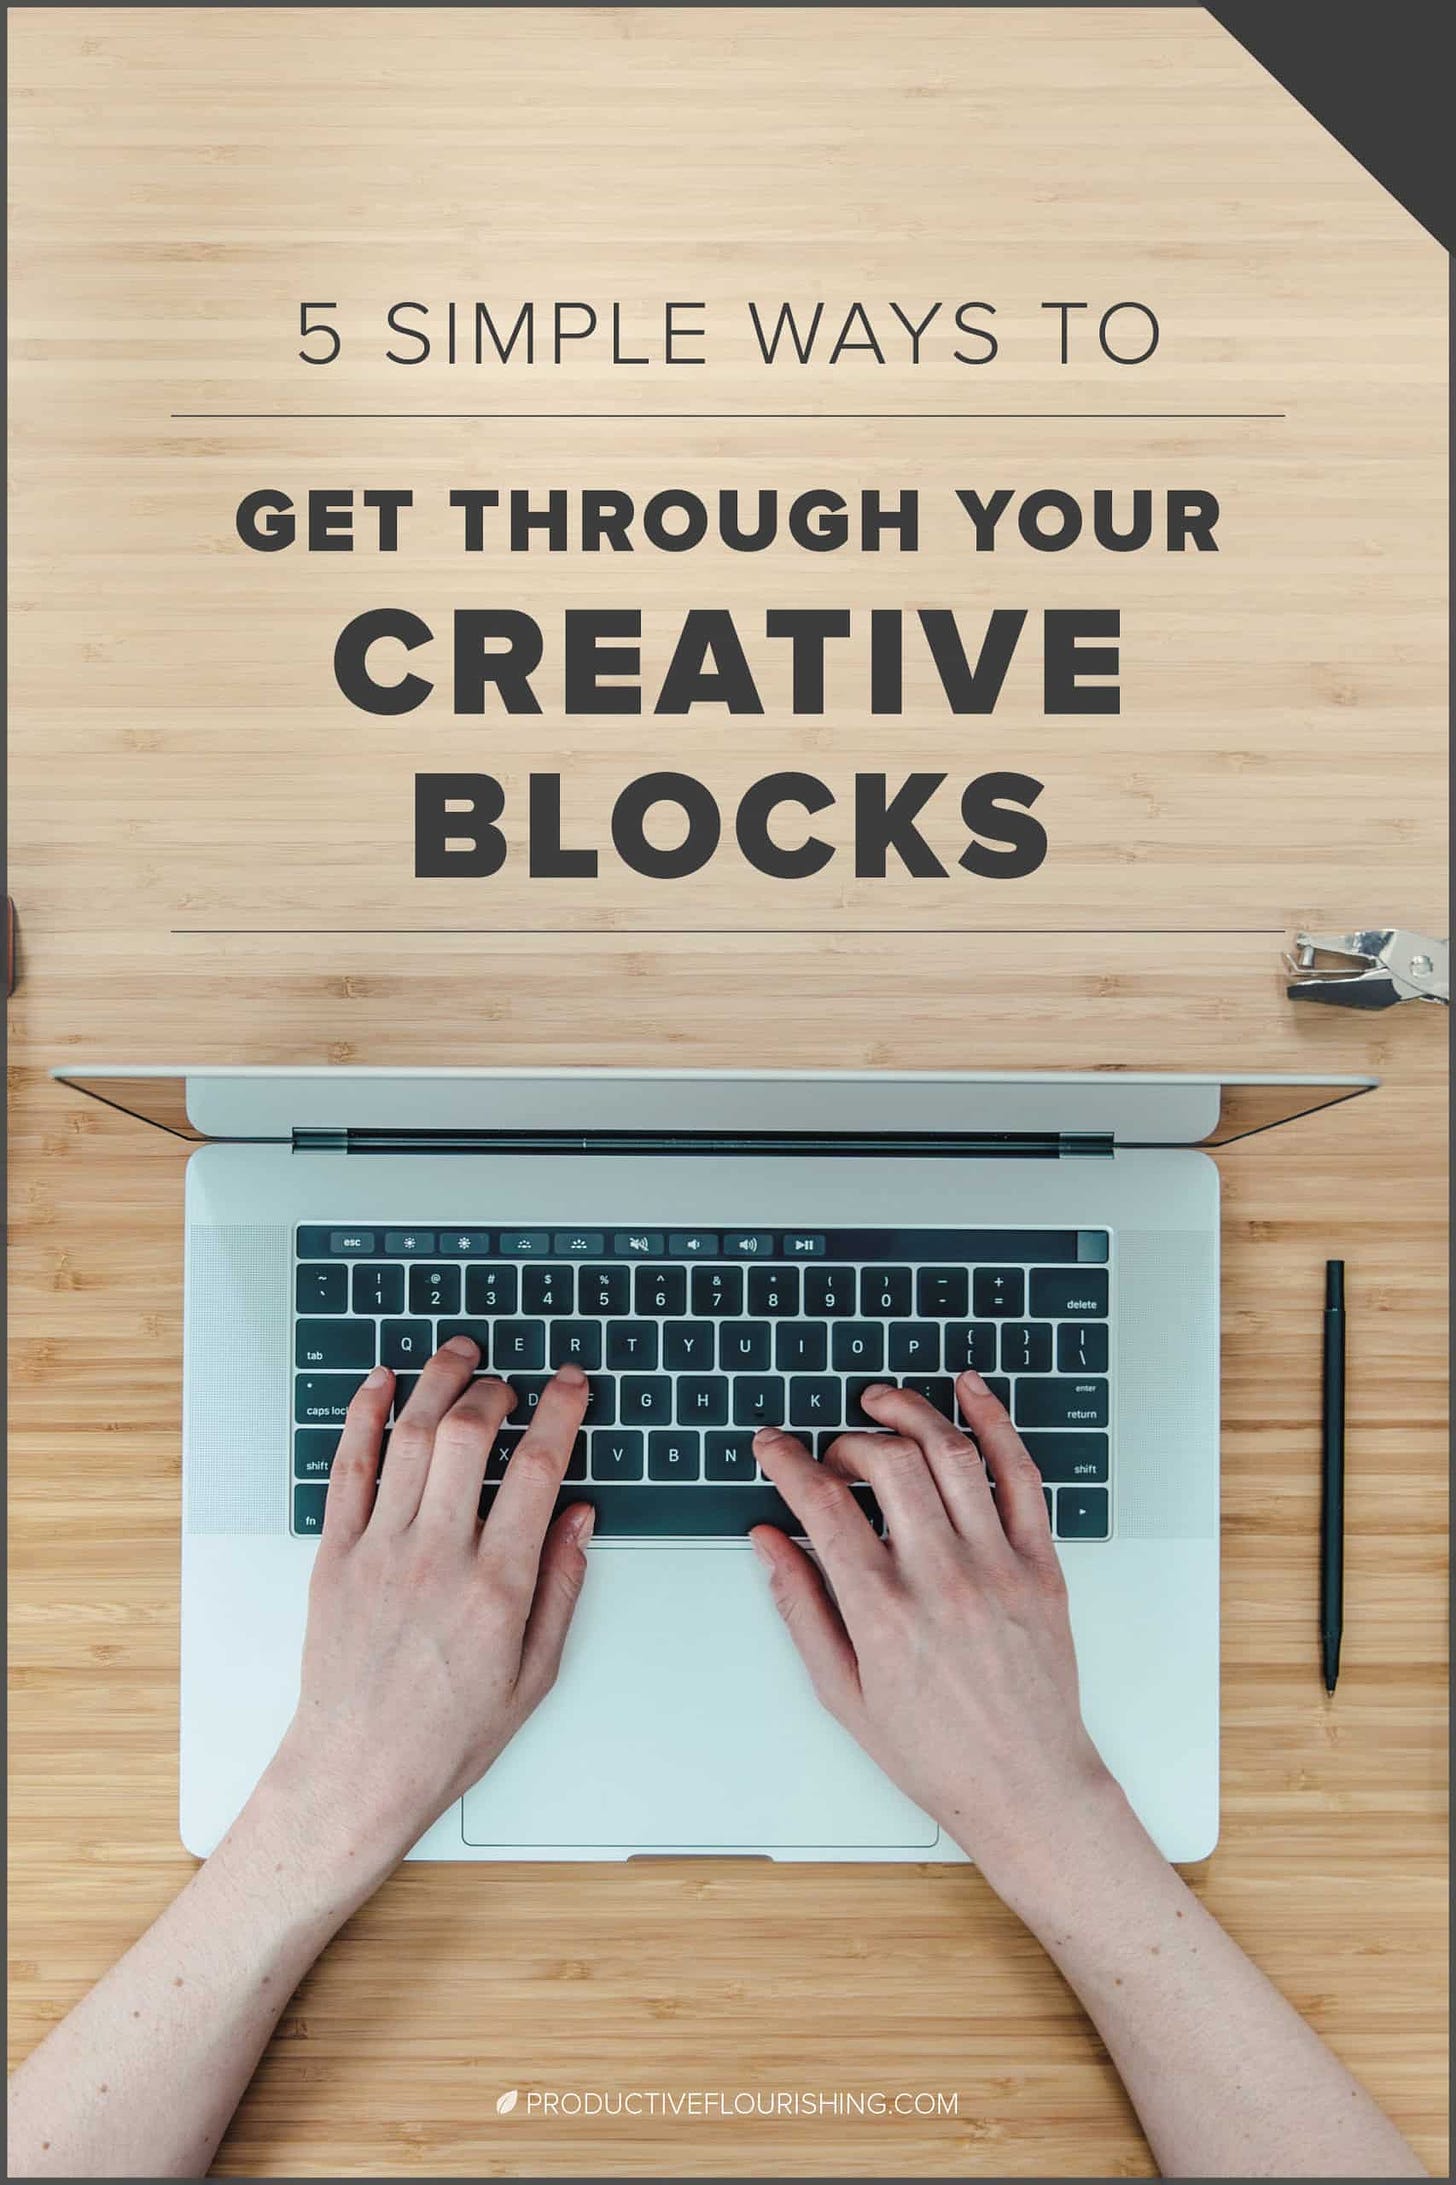 5 Simple Ways to Get Through Your Creative Blocks. While there are a few outliers who get more positively excited towards the end of a business project, most of us don’t. That’s why we entrepreneurs can hold onto things and stop finishing. Here are some things you can do to get your projects wrapped up when creative resistance is holding those last few yards. #businessproductivity #entrepreneurgoals #productiveflourishing